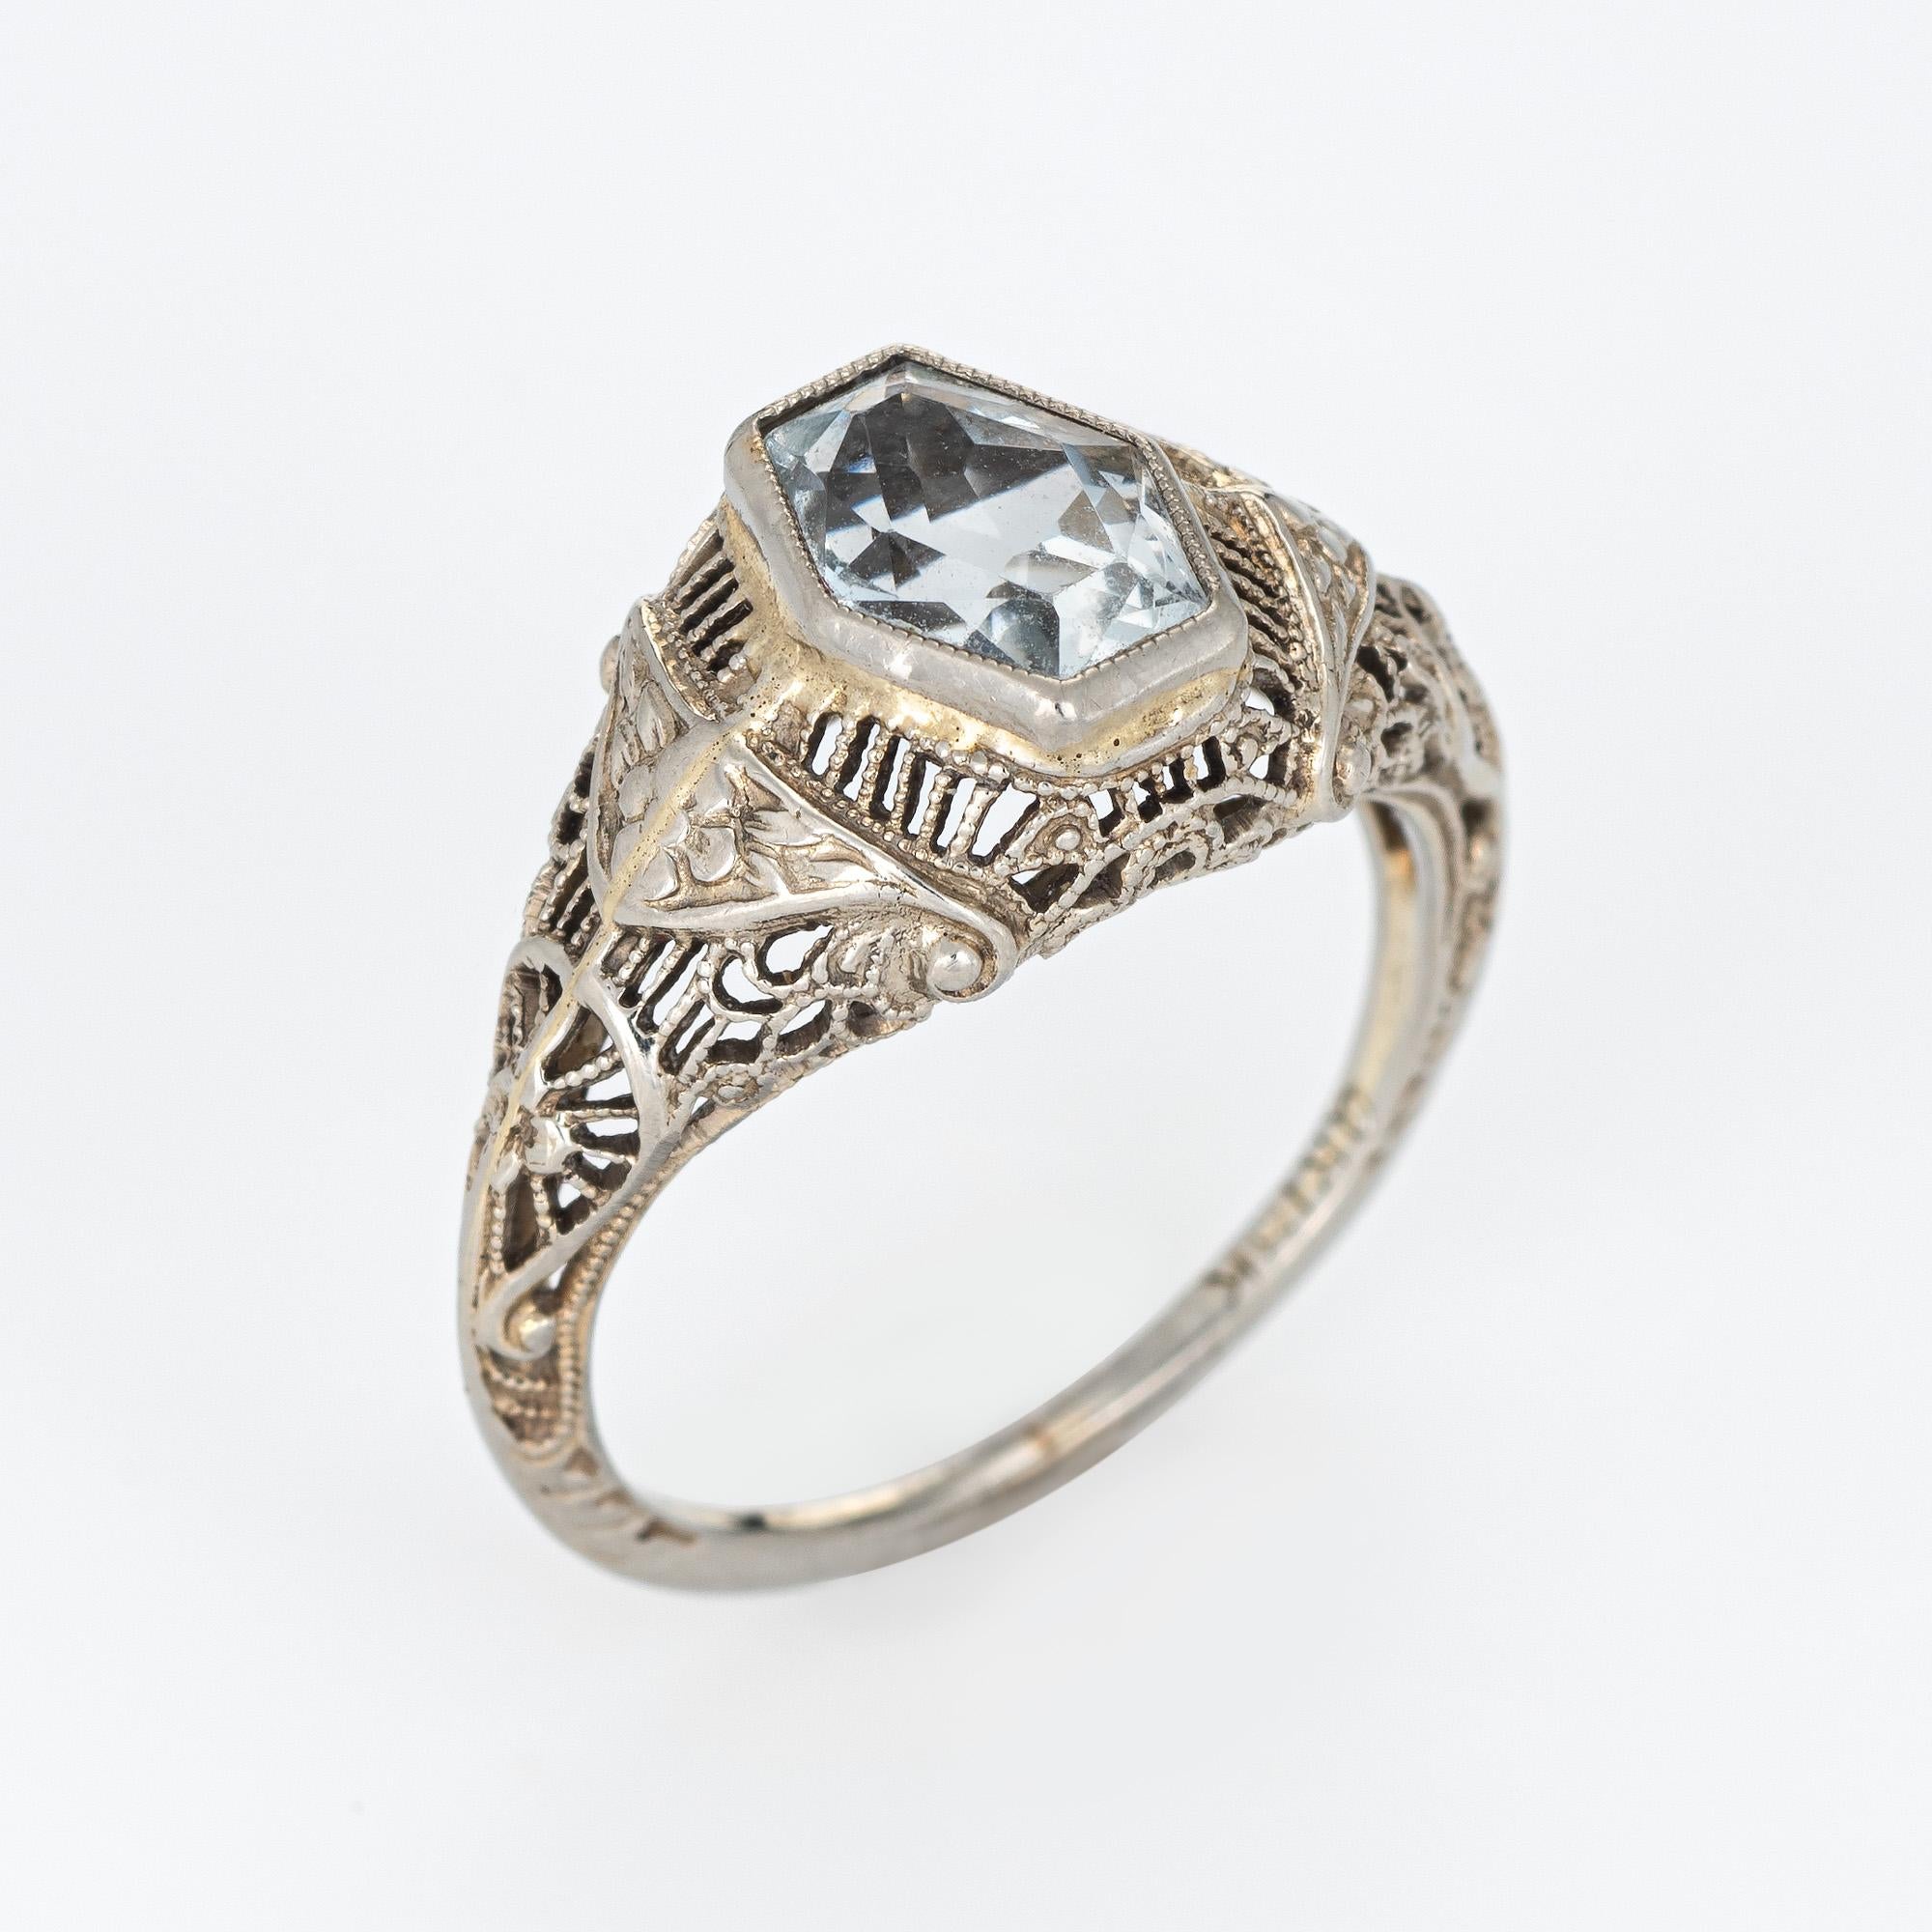 Finely detailed vintage Art Deco era aquamarine filigree ring (circa 1920s to 1930s) crafted in 18k white gold. 

The aquamarine measures 7mm x 5.5mm and is estimated at 1.10 carats. The aquamarine is in excellent condition and free of cracks or